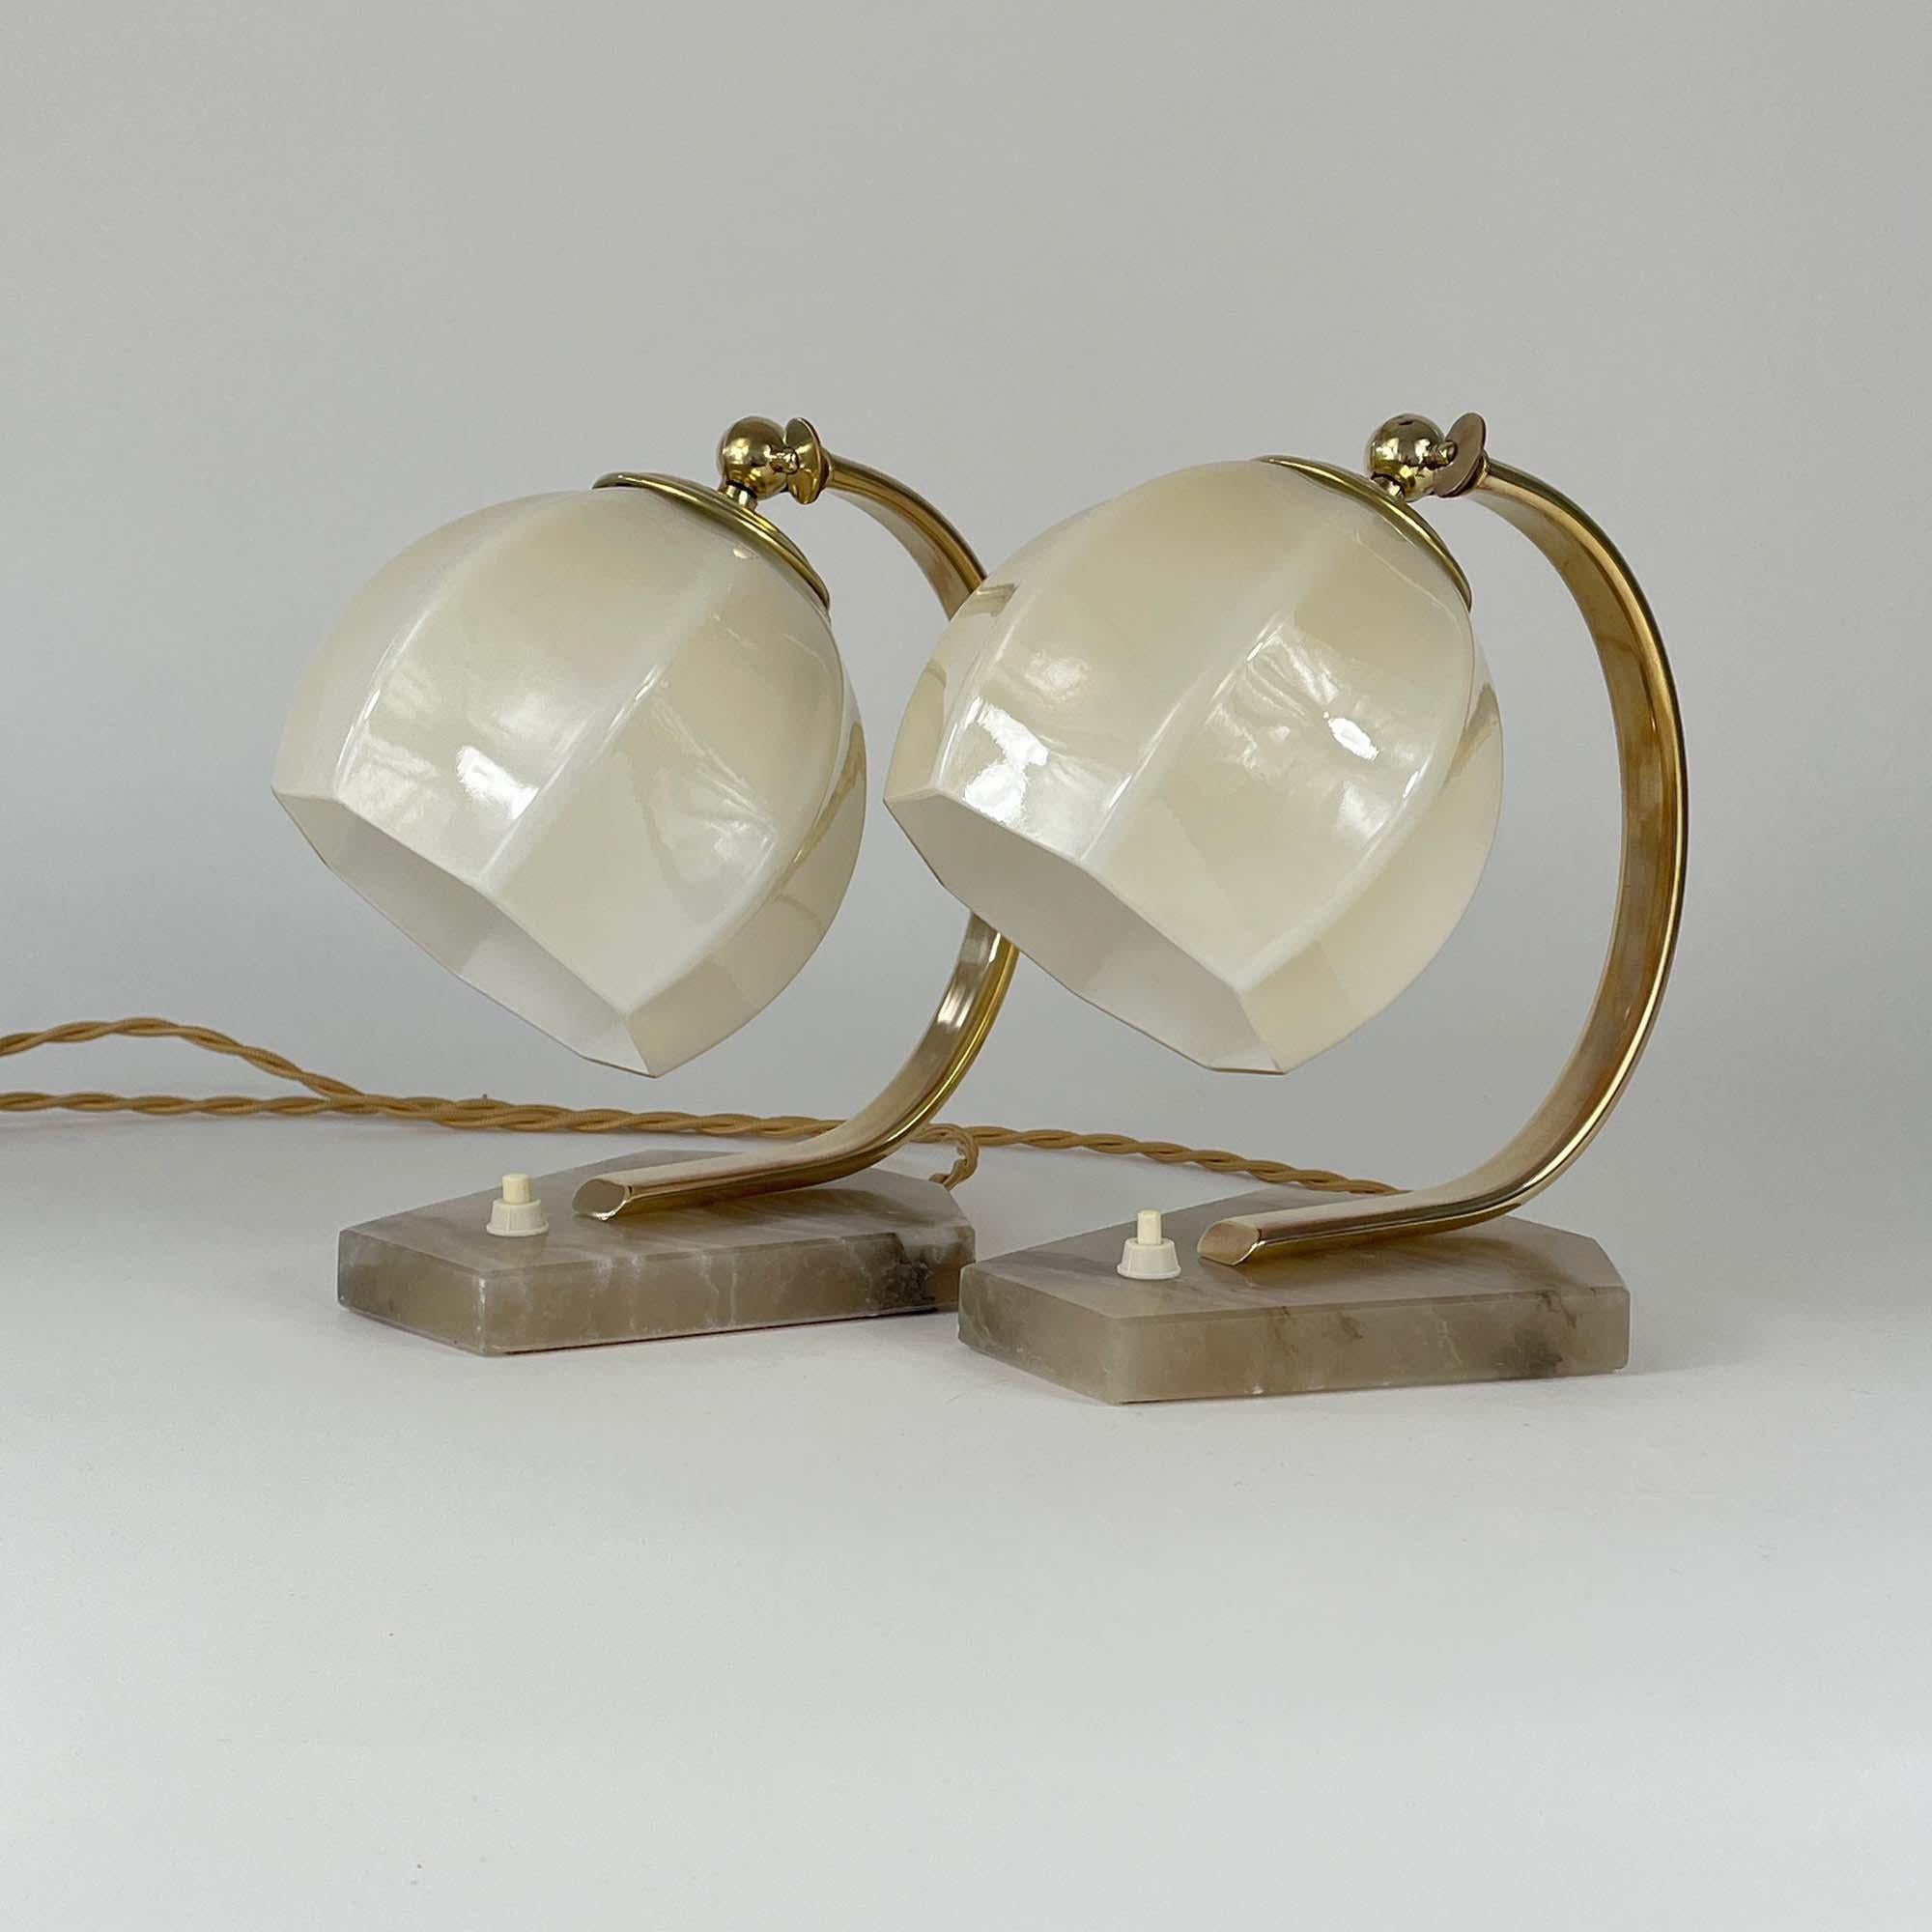 1930s table lamps